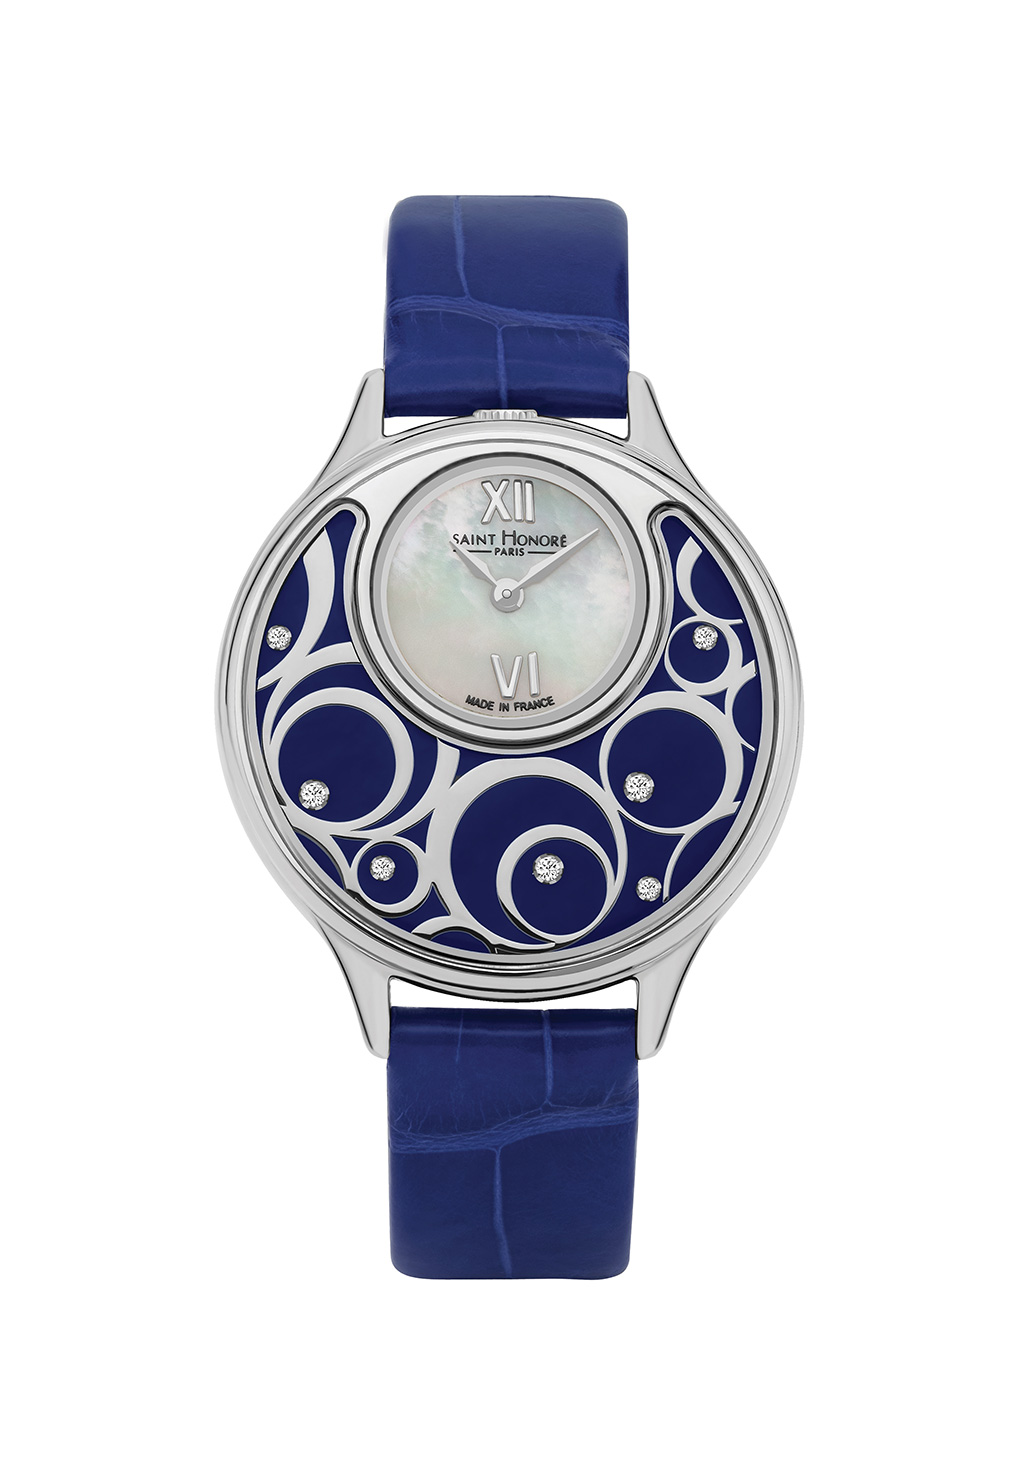 DAUPHINE Women's watch - stainless steel, wht mop dial, blue leather strap